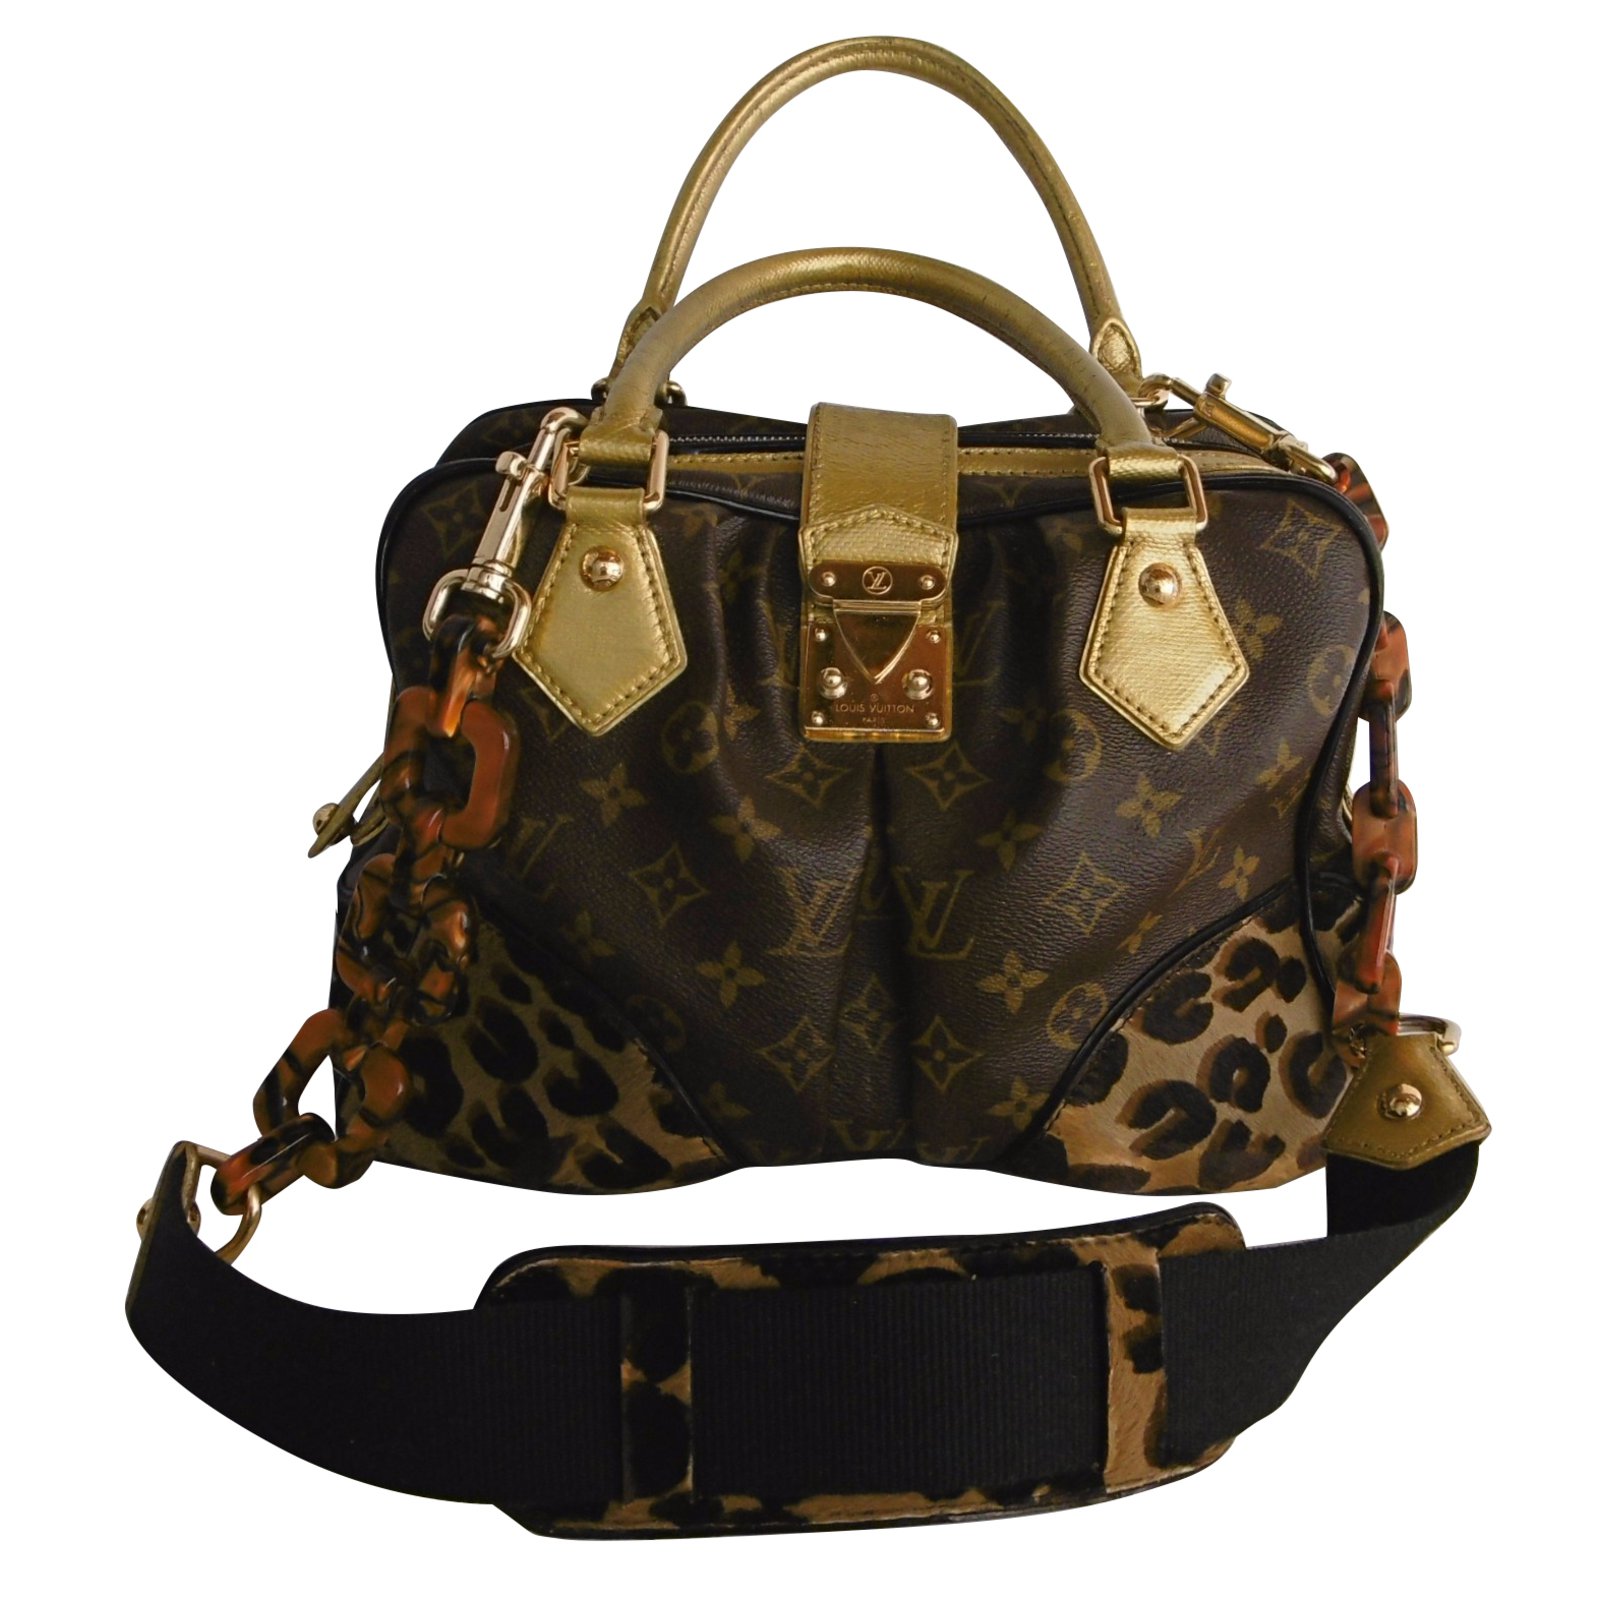 Louis Vuitton Cuir Vernis Bag | Confederated Tribes of the Umatilla Indian Reservation